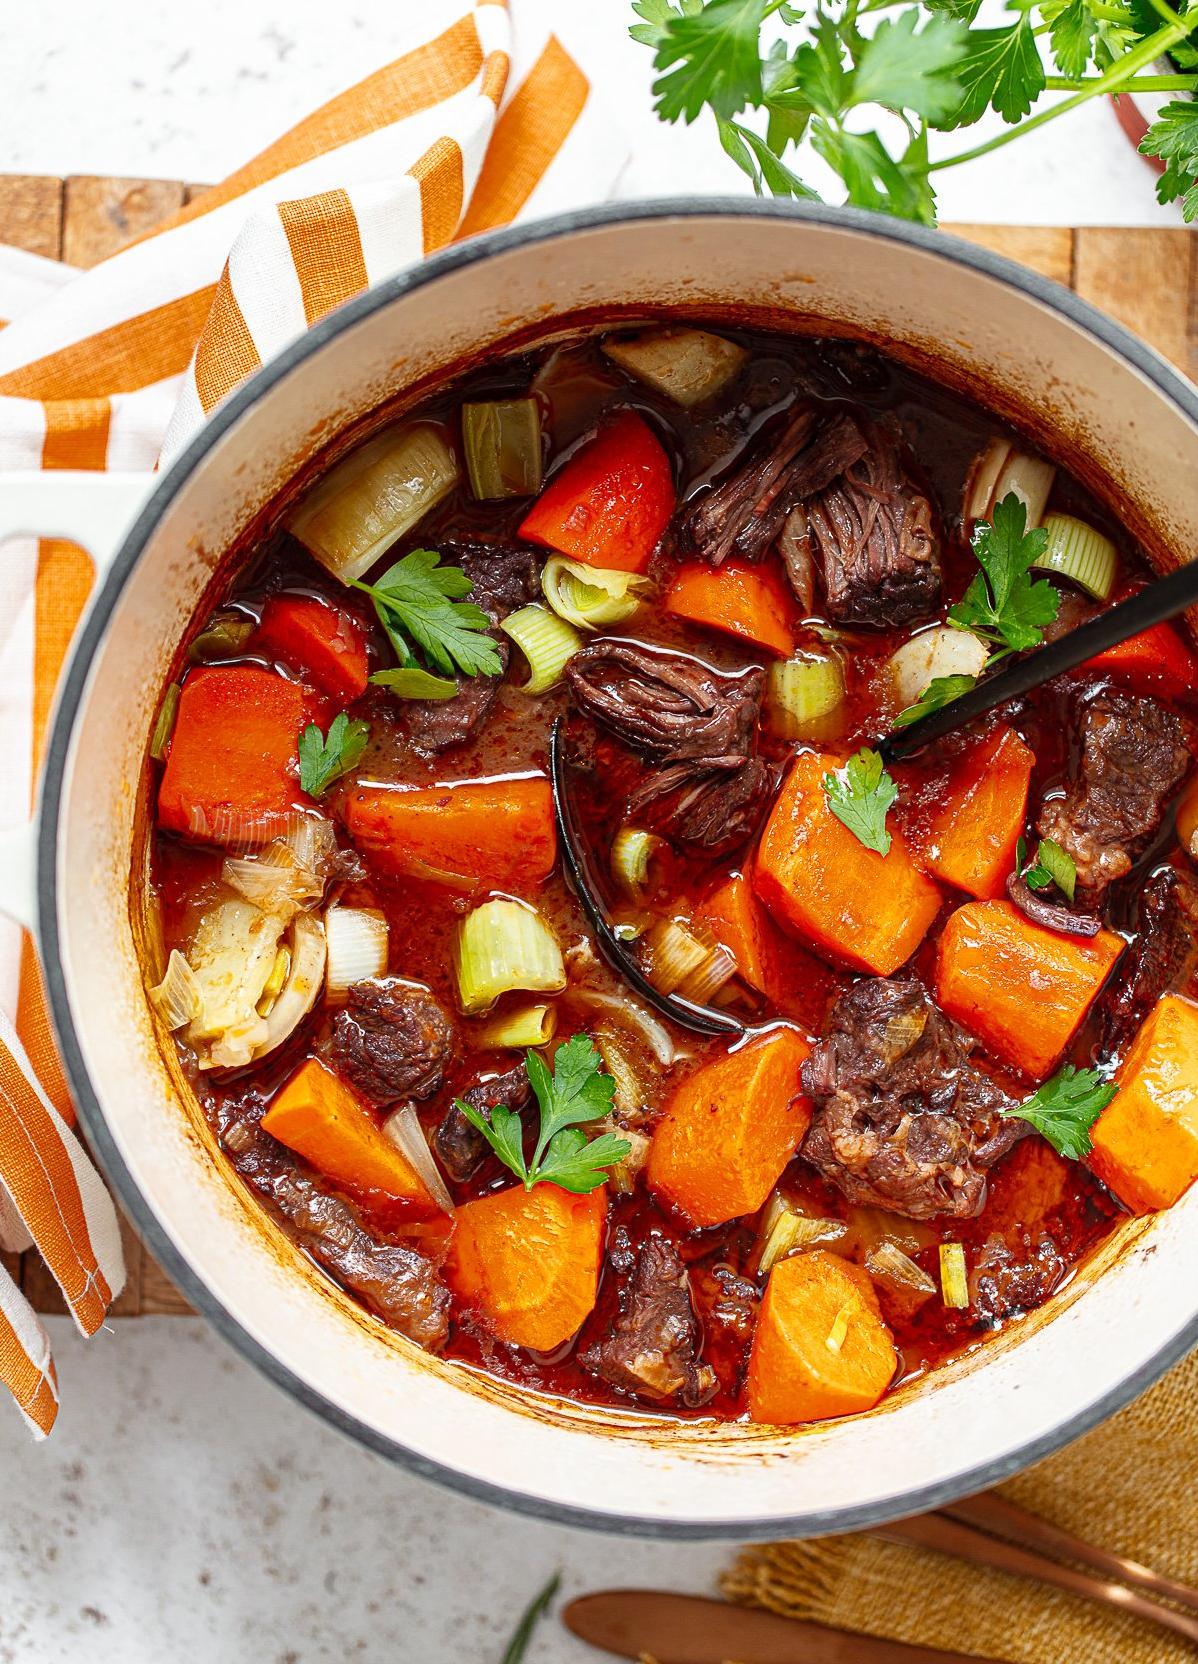  A comforting casserole with a rich red wine sauce.